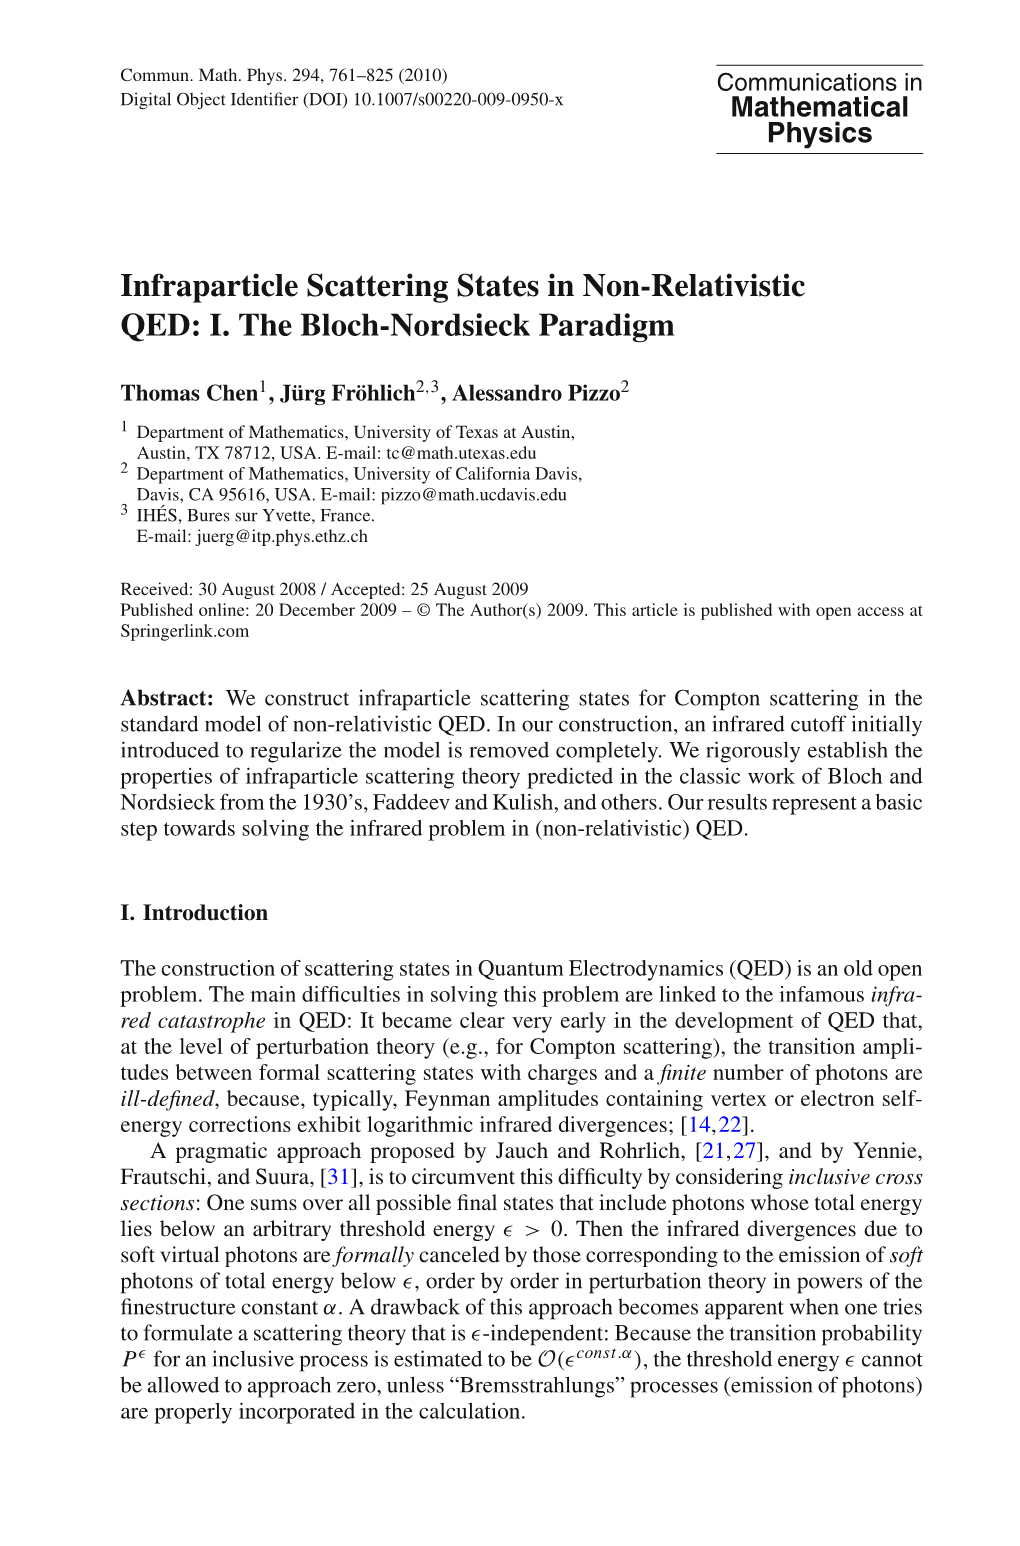 Infraparticle Scattering States in Non-Relativistic QED: I